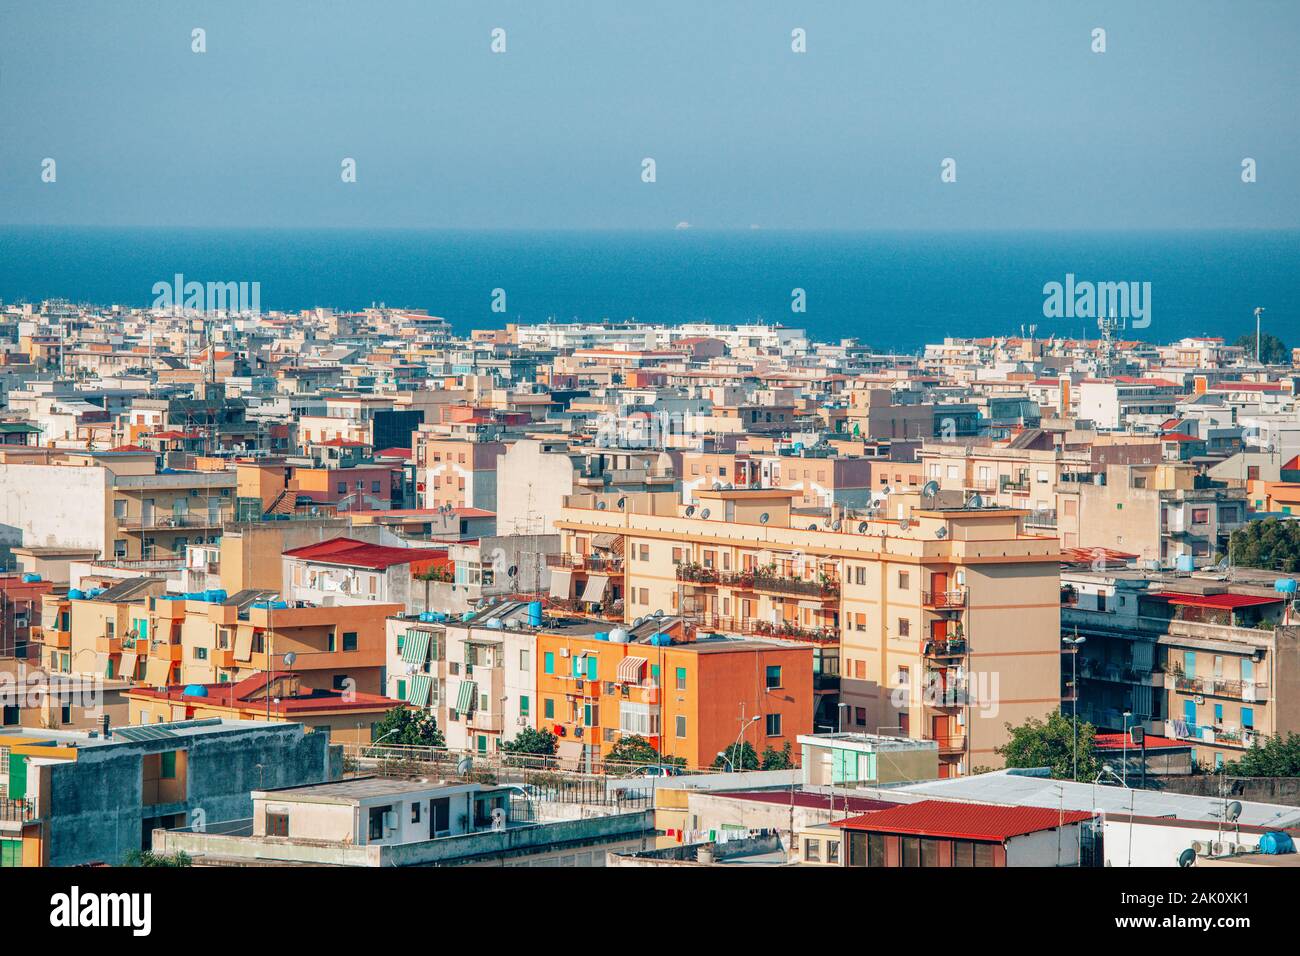 Residential multi-story buildings in Reggio Calabria, urban quarter vintage toned, view on Messina strait Stock Photo